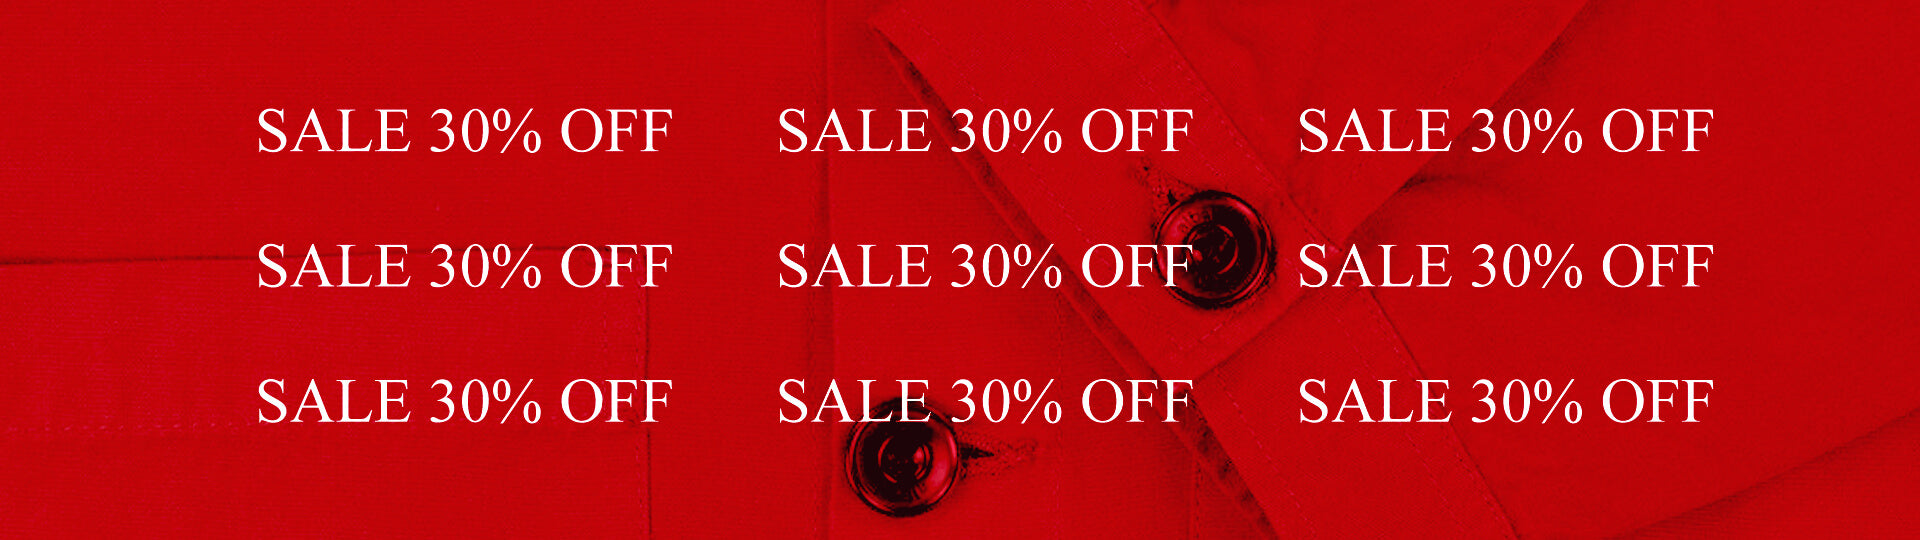 albam-5-23-sale-banner-with-image_1